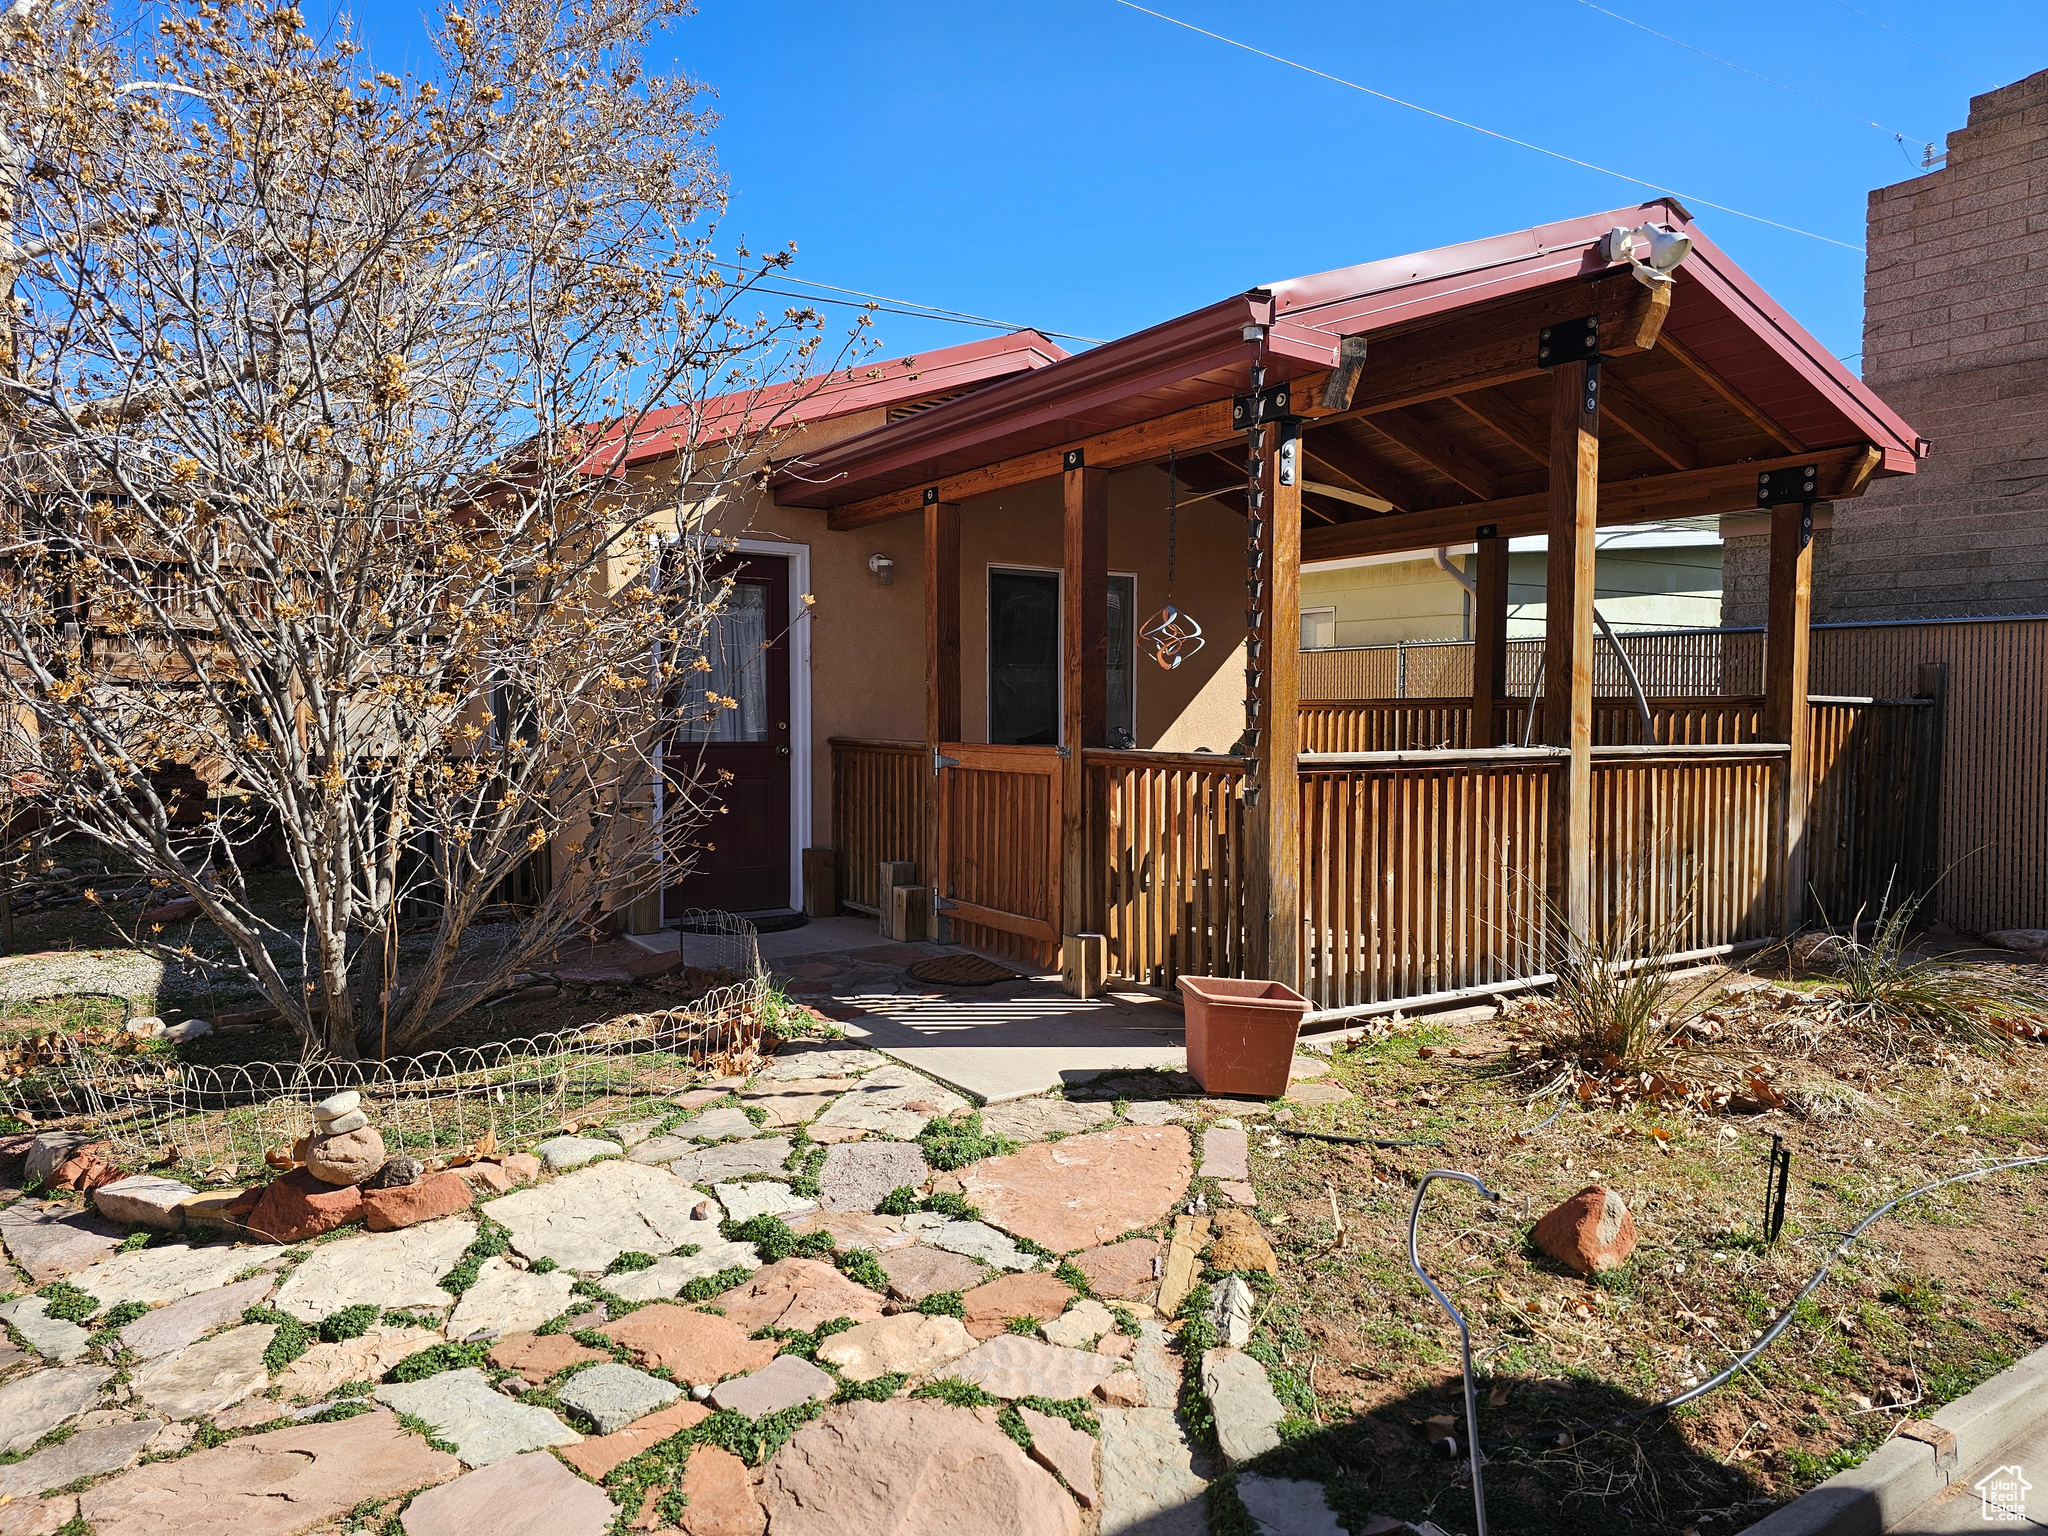 343 TUSHER, Moab, Utah 84532, 3 Bedrooms Bedrooms, 9 Rooms Rooms,1 BathroomBathrooms,Residential,For sale,TUSHER,1984155